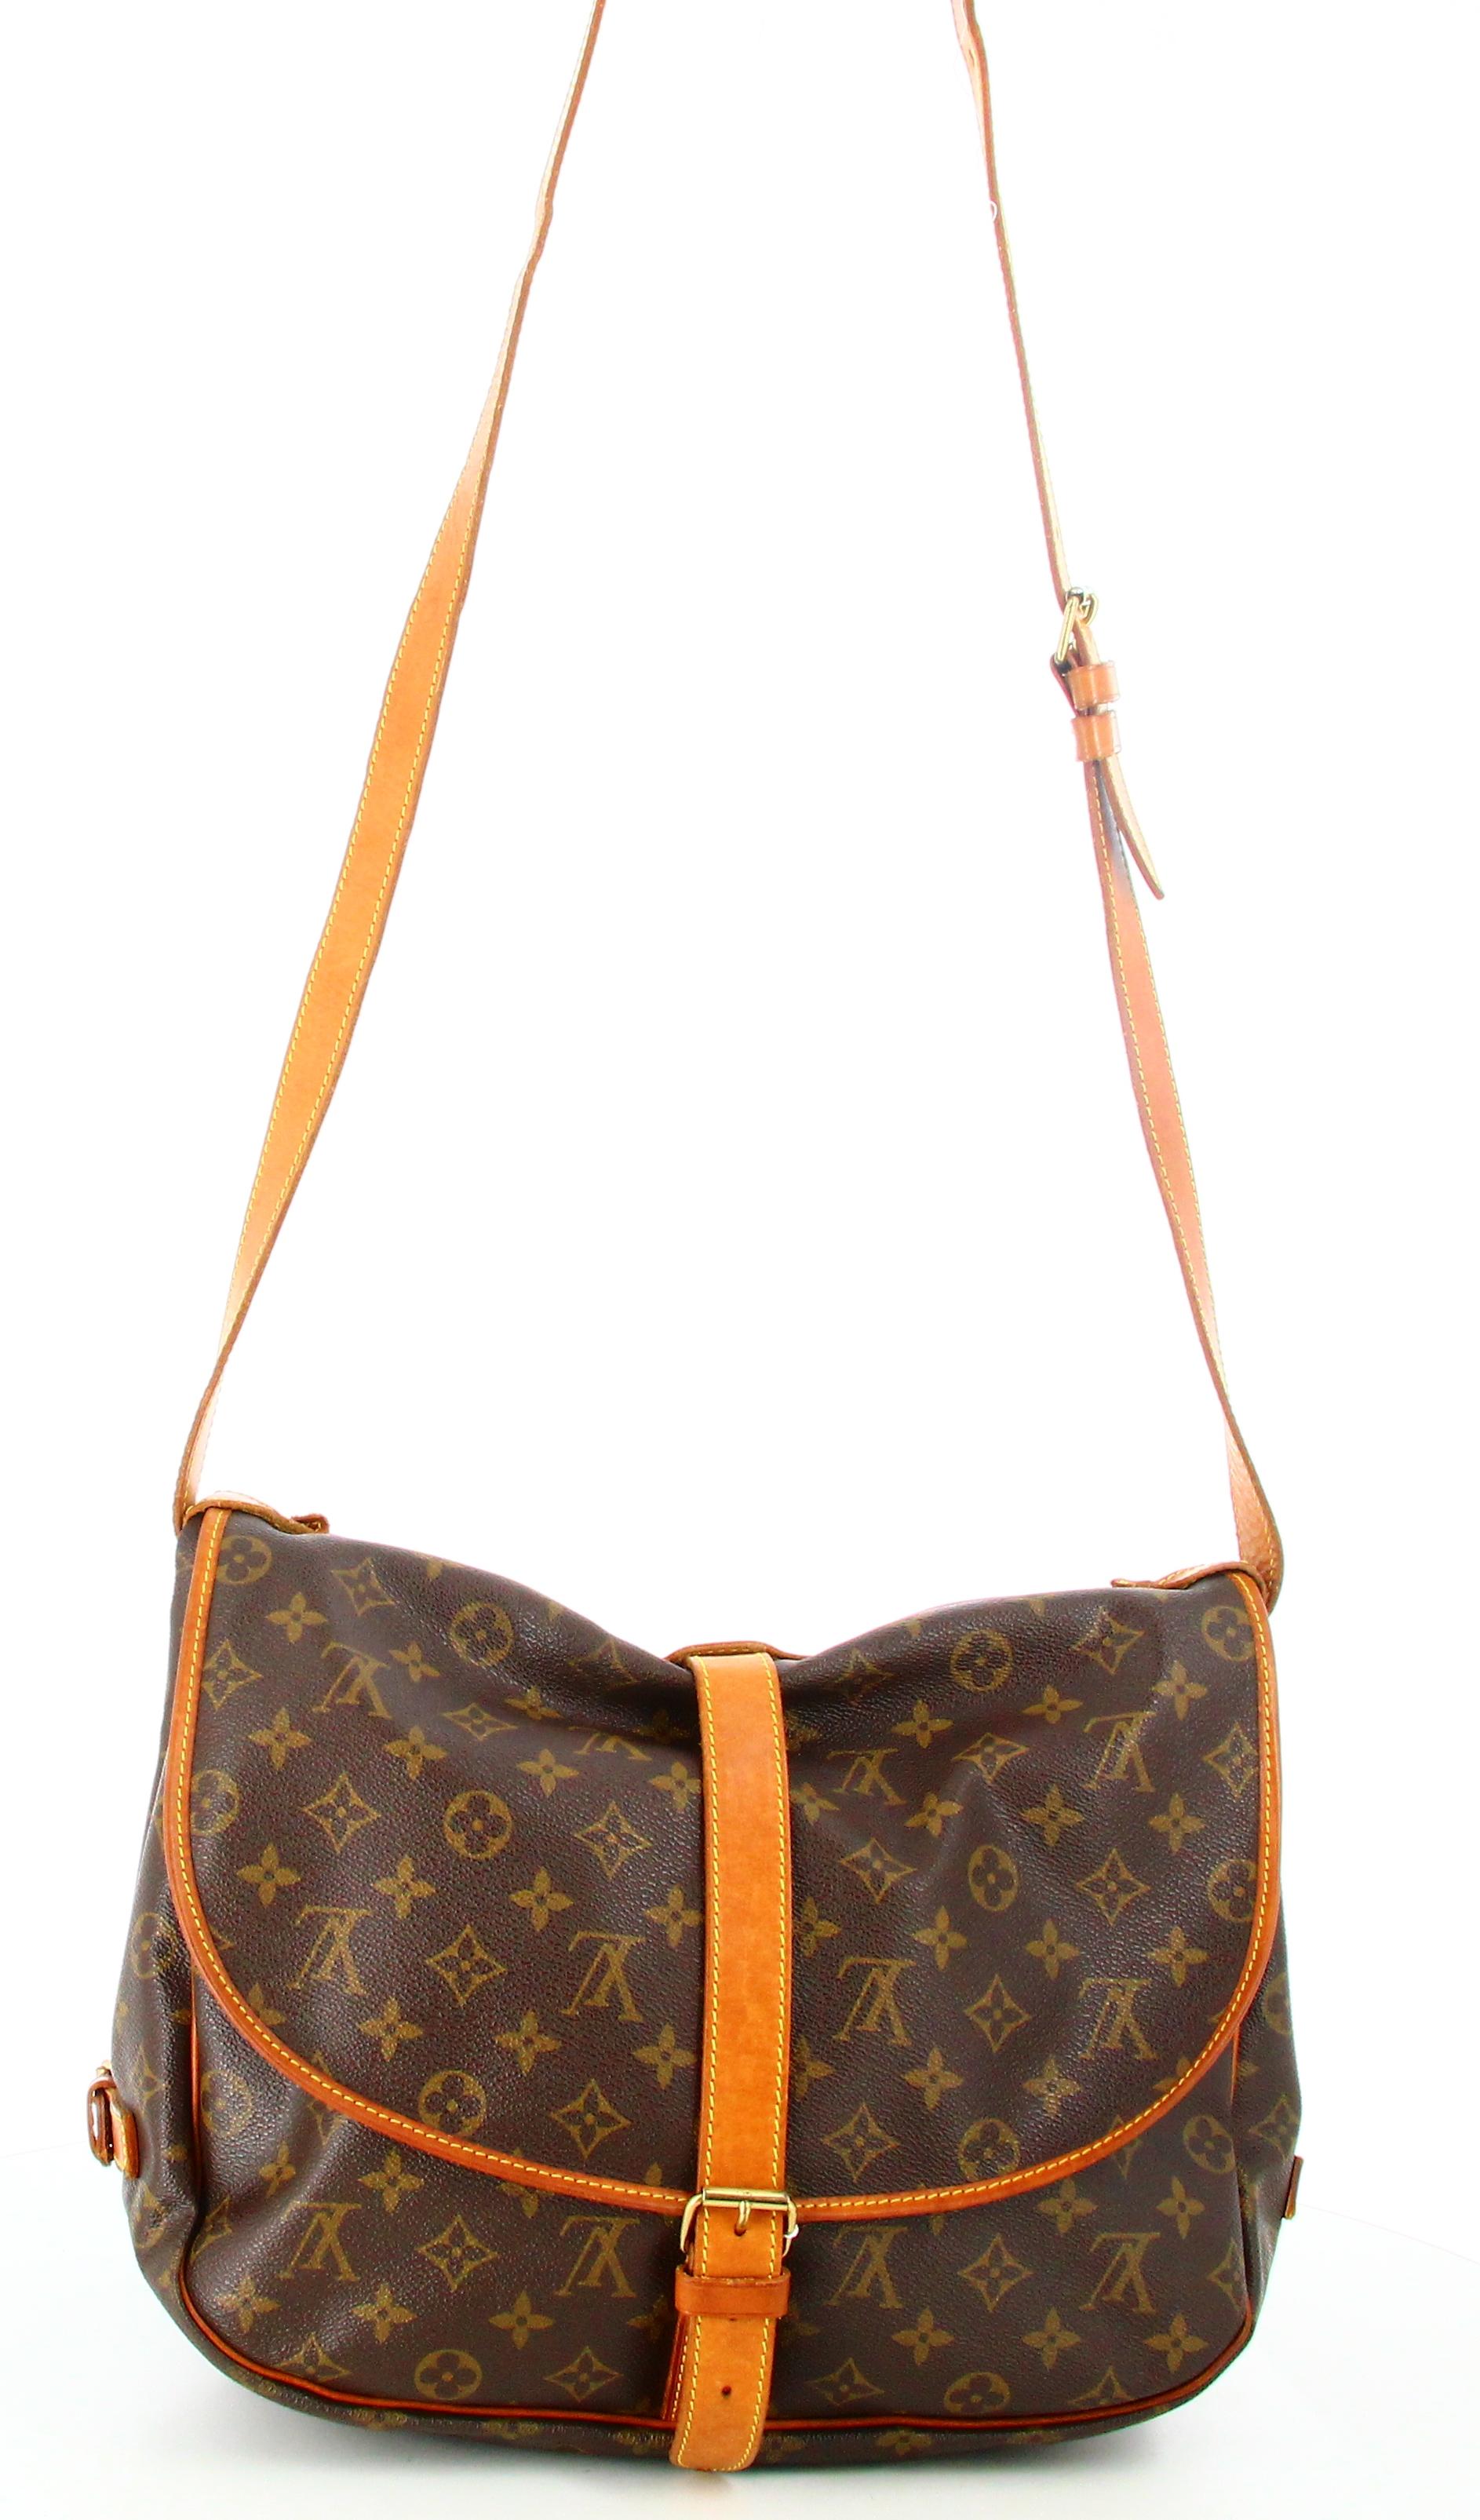 1995 Louis Vuitton Canvas Monogram Bag GM

- Very good condition. Shows no signs of wear over time.
- Louis Vuitton Bag
- Canvas monogram
- Long brown leather strap
- Two parts
- Inside: brown canvas plus inside pockets.